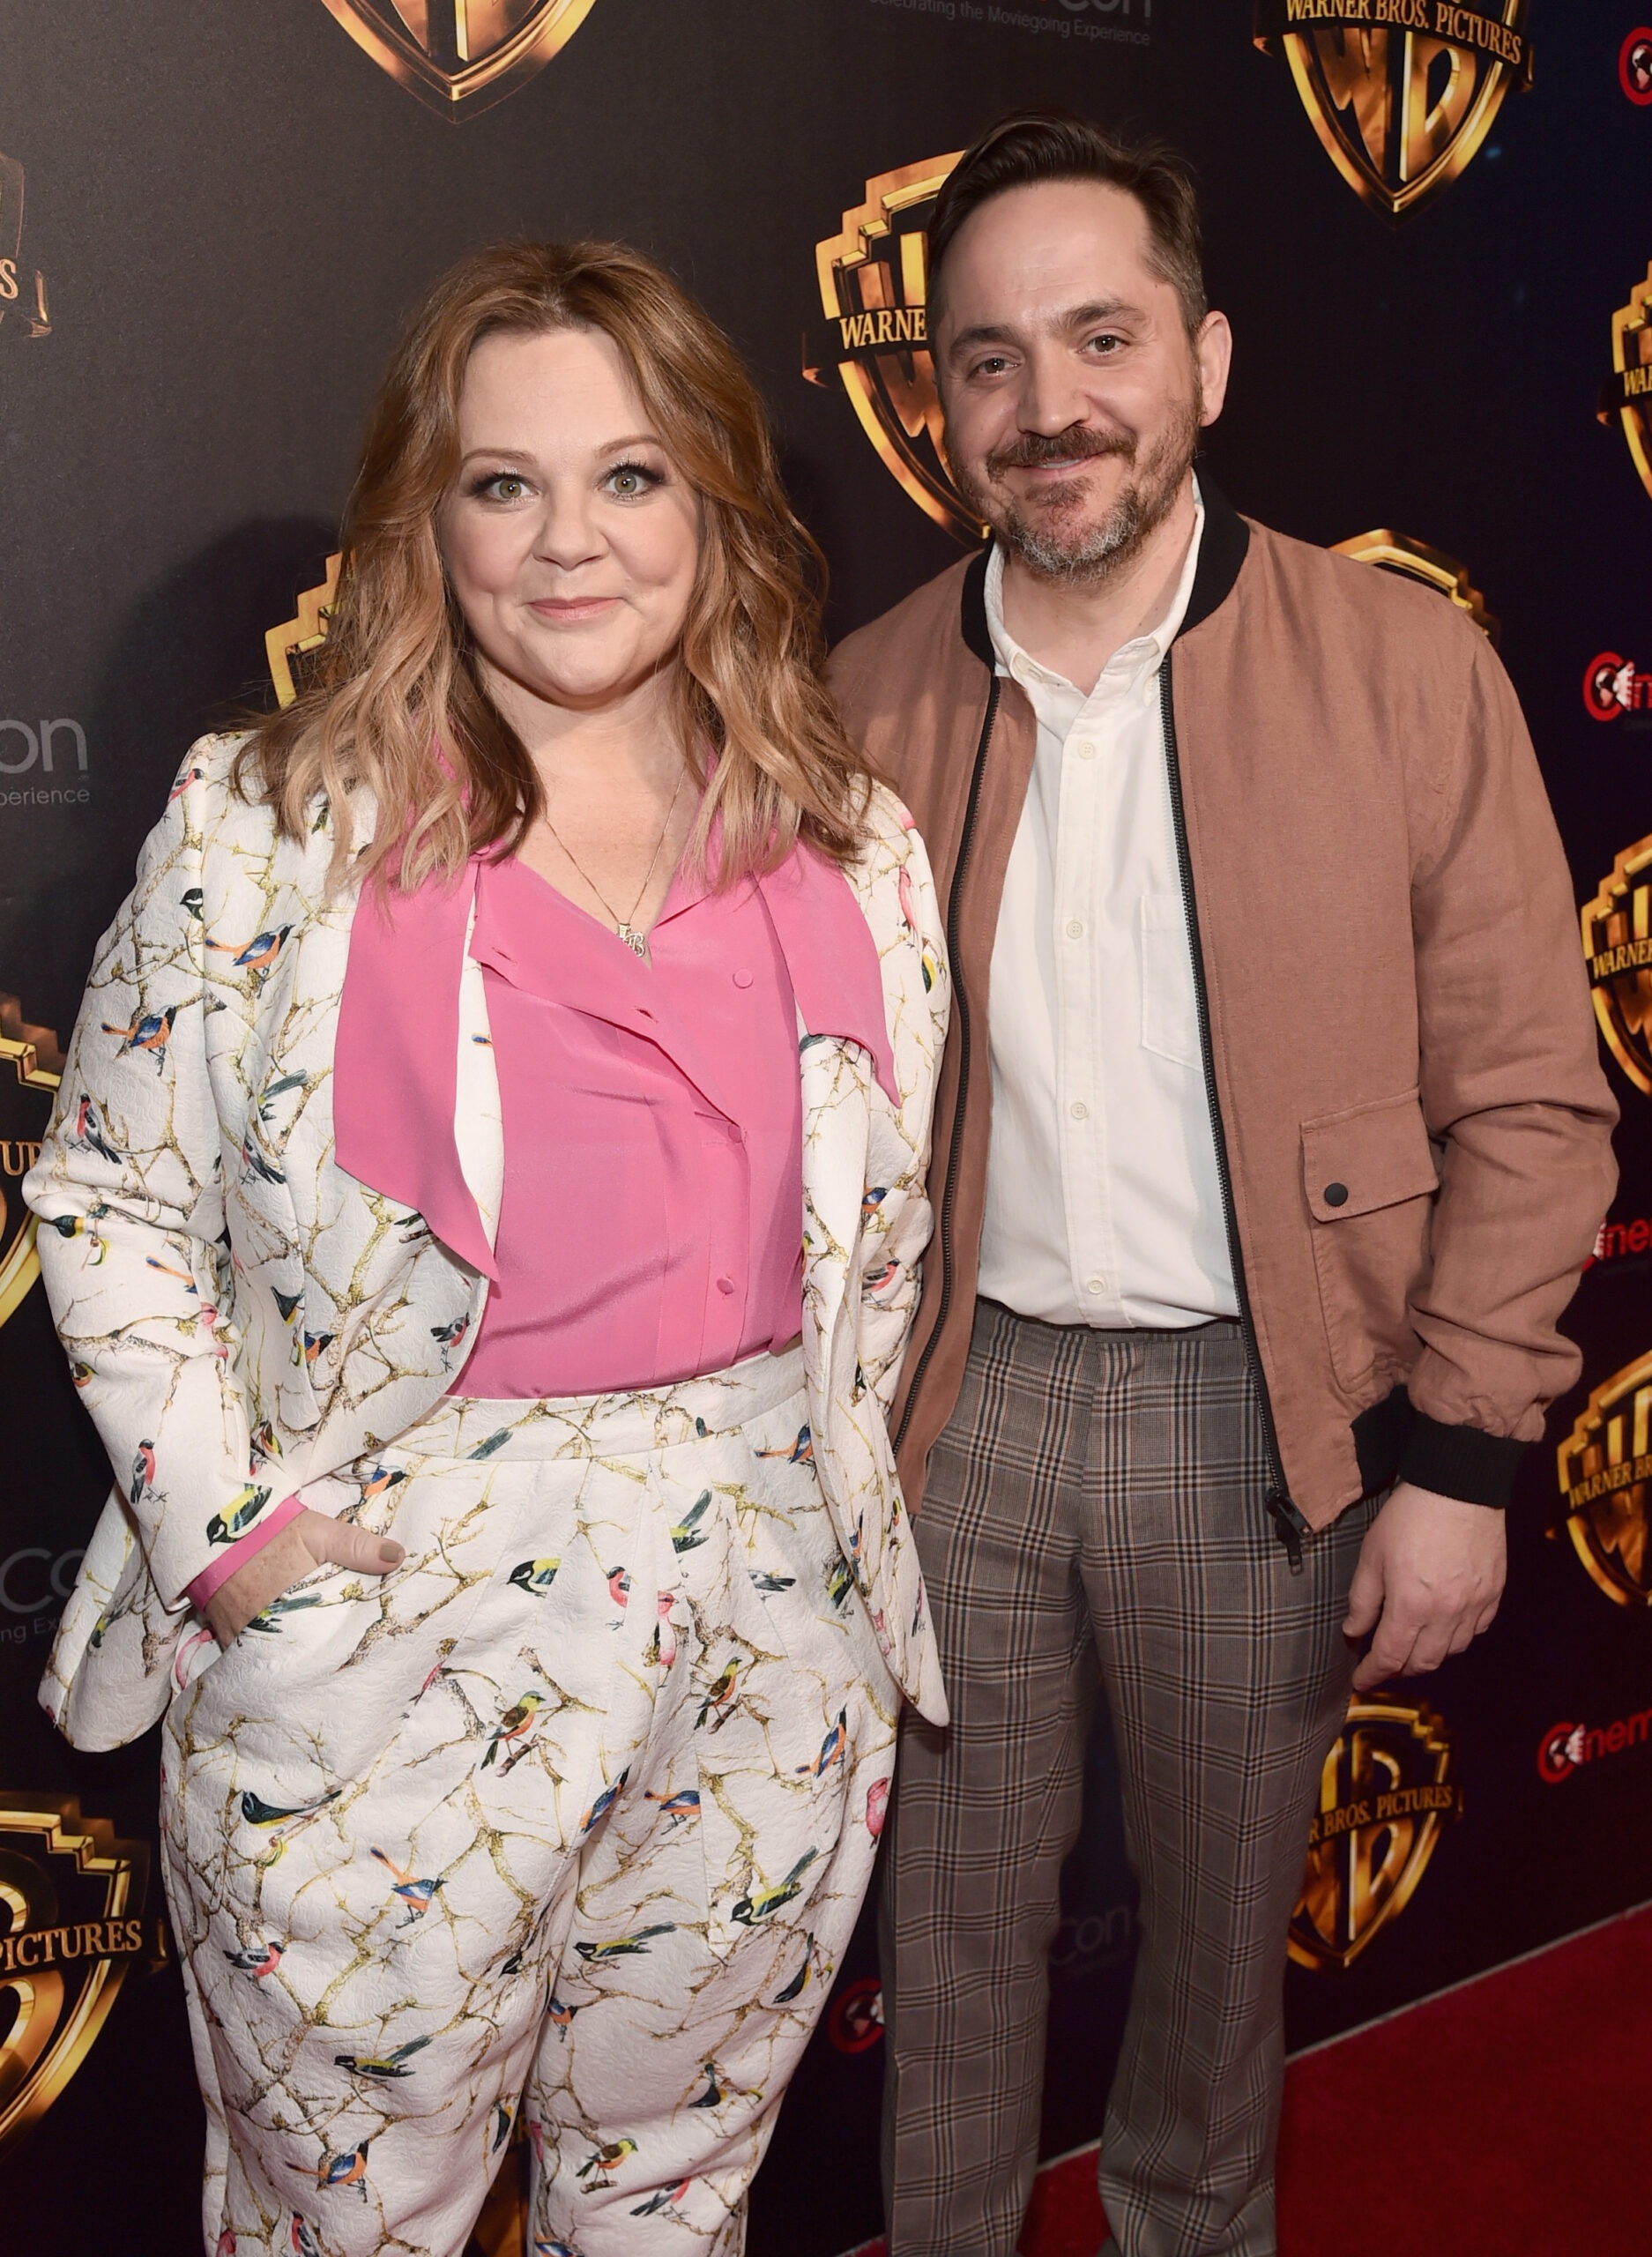 Melissa McCarthy and Ben Falcone at CinemaCon in Las Vegas, Nevada on April 24, 2018 | Source: Getty Images